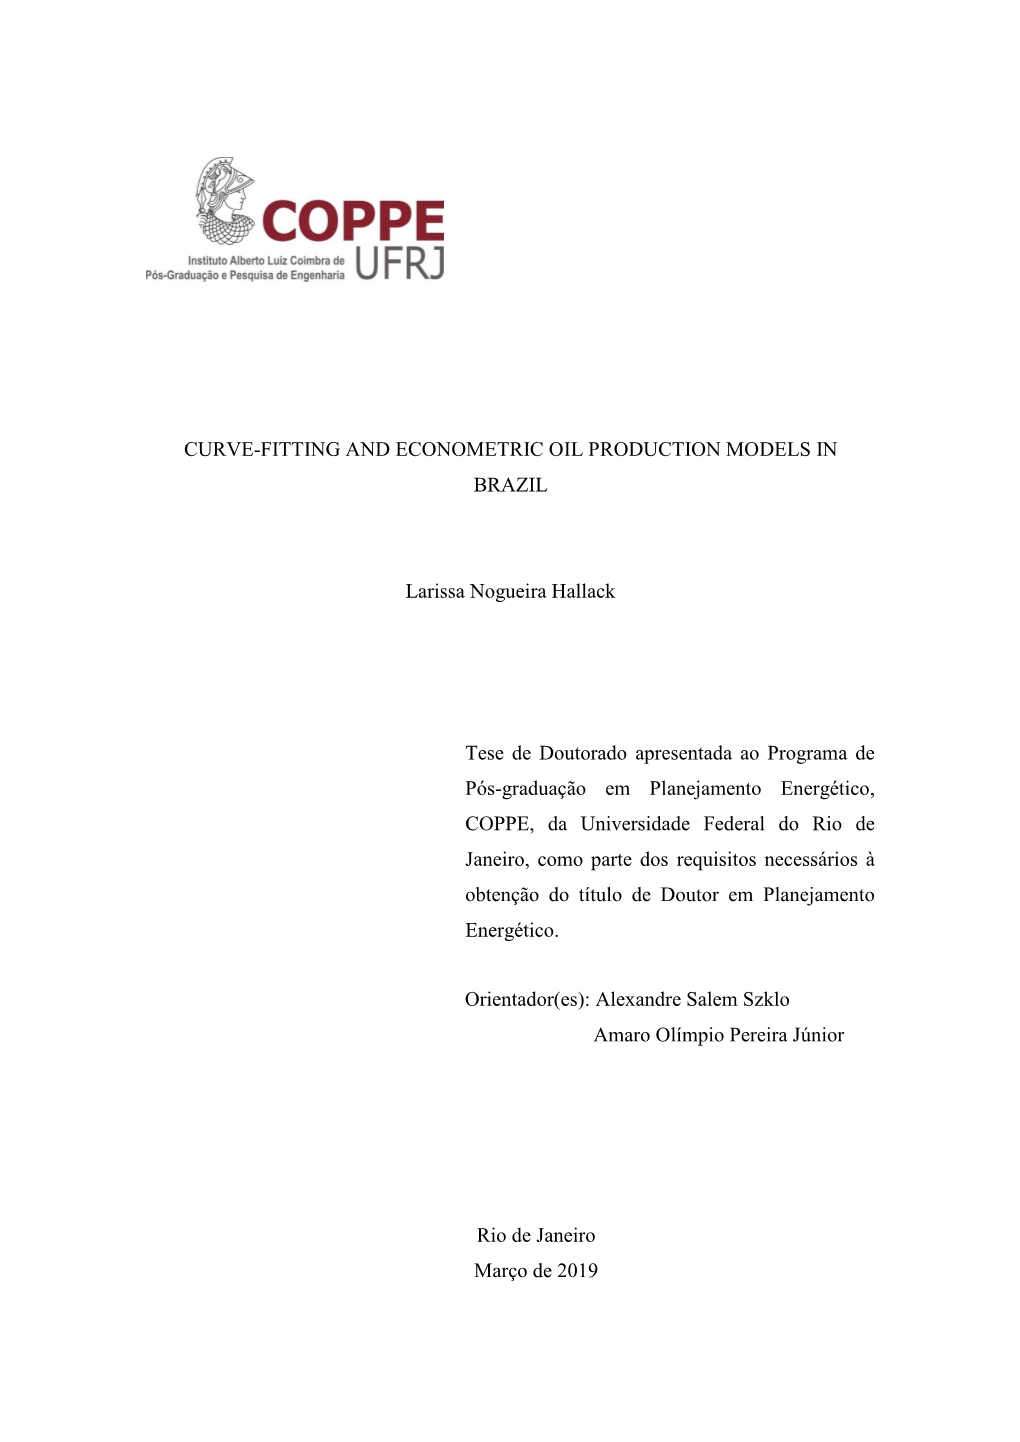 Curve-Fitting and Econometric Oil Production Models in Brazil